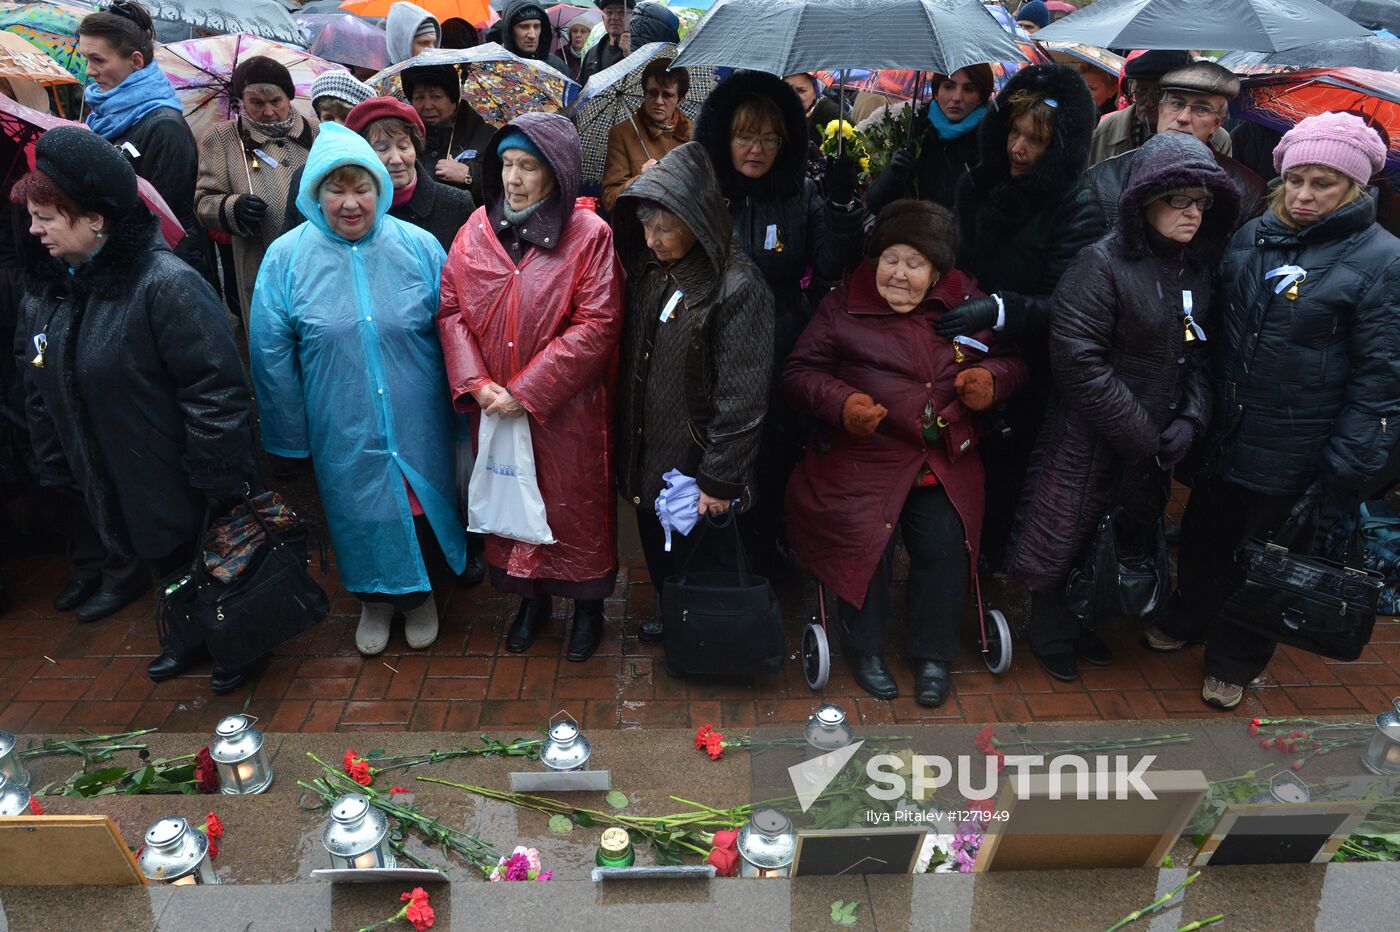 Memorial events for Nord-Ost siege victims